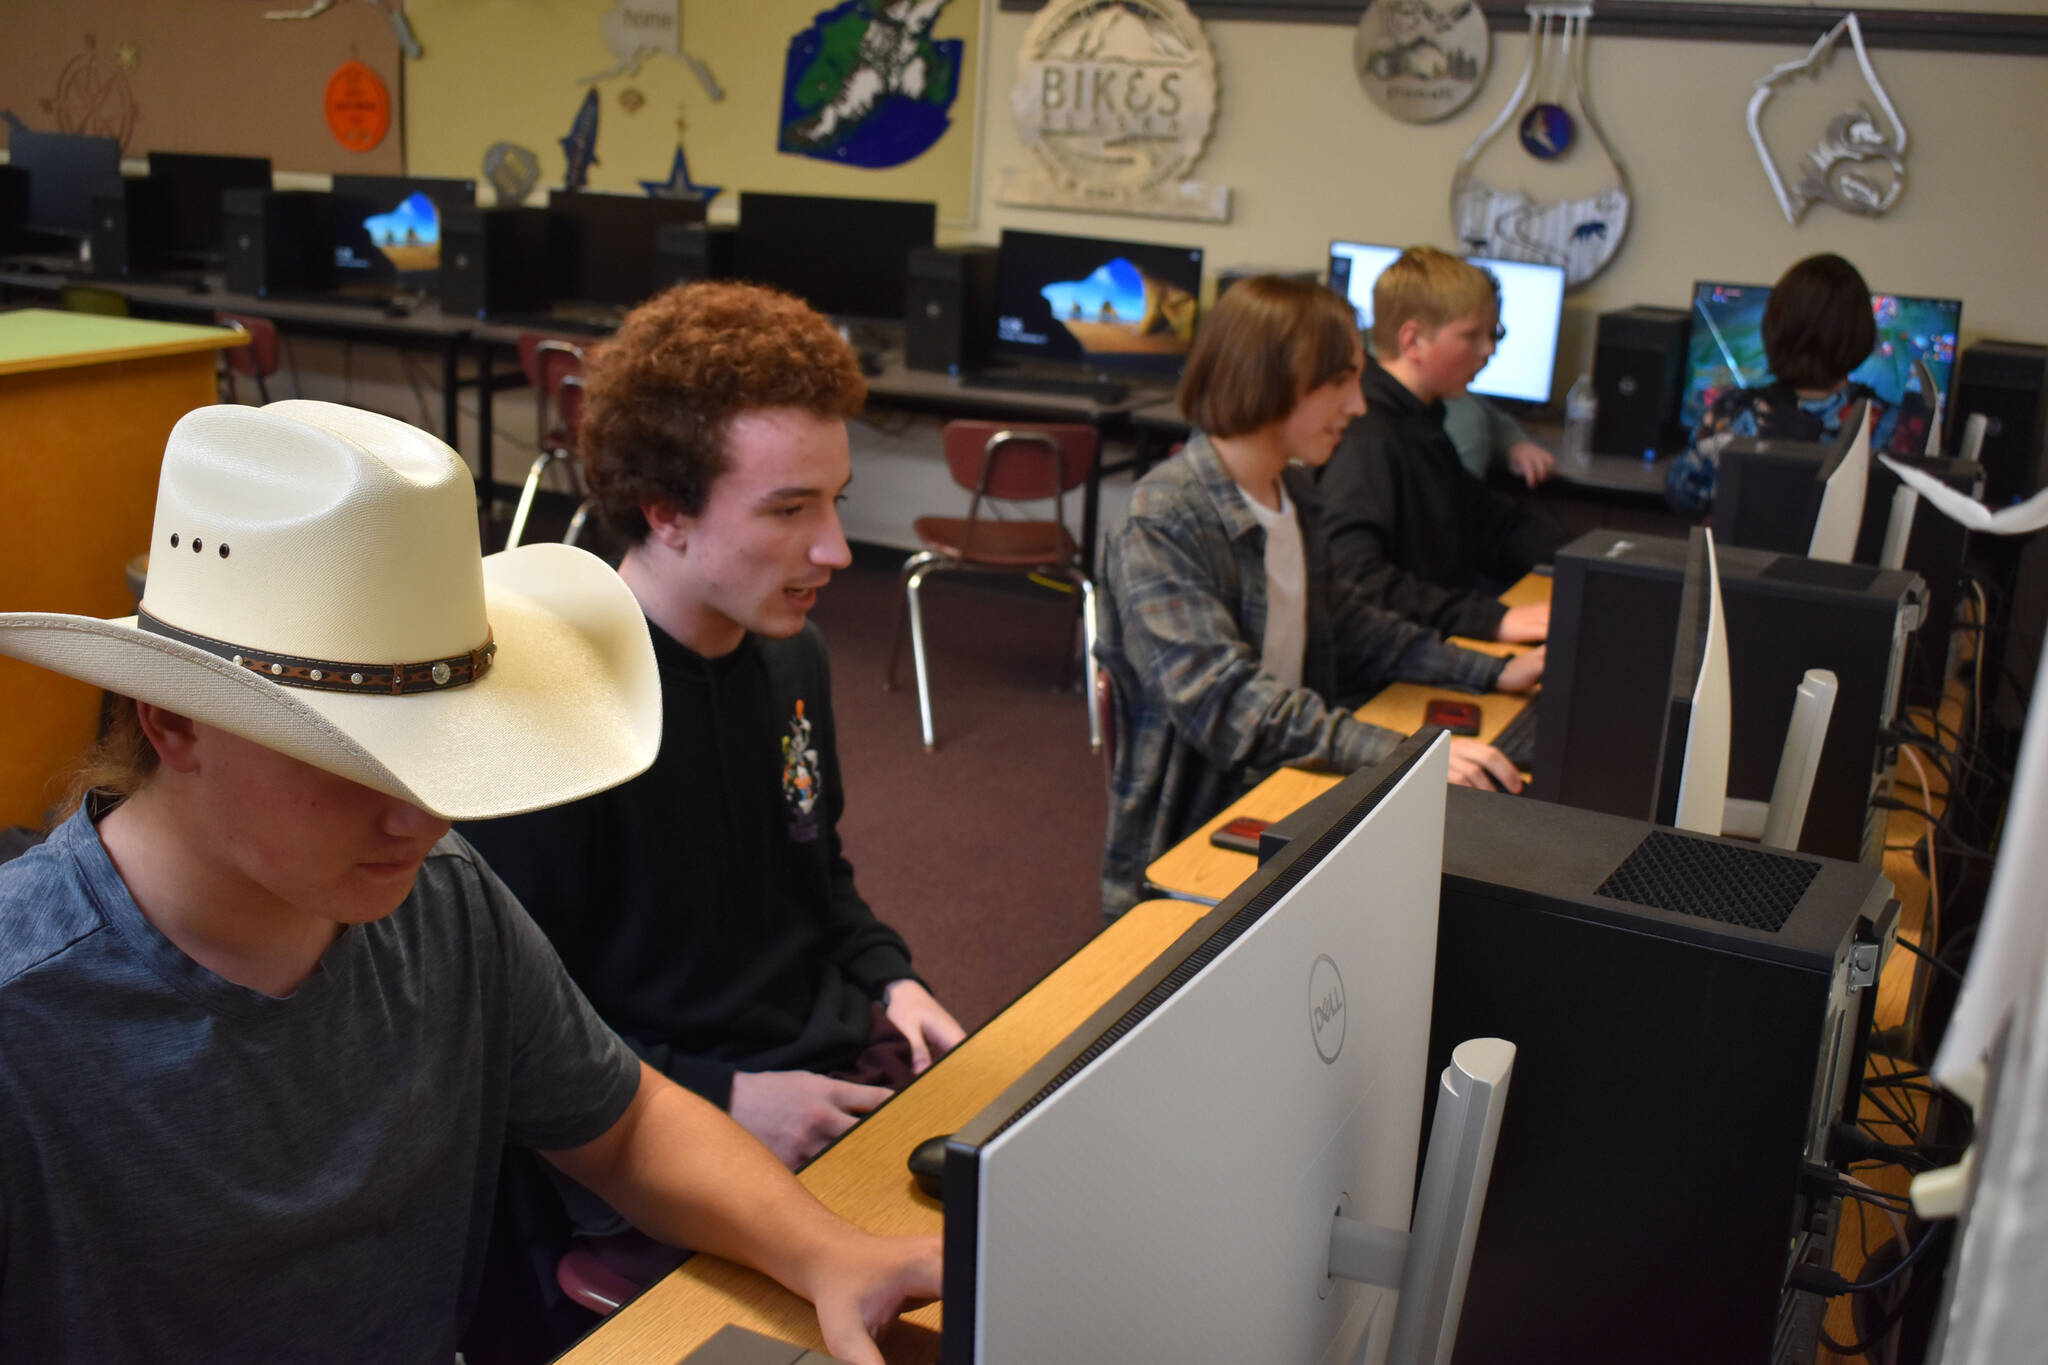 Dain Douthit, Silas Thibodeau, Cody Good, Roman Dunham and Jackson Anding compete for Kenai Central High School in a League of Legends match on Tuesday, Sept. 27, 2022, at Kenai Central High School in Kenai, Alaska. (Jake Dye/Peninsula Clarion)